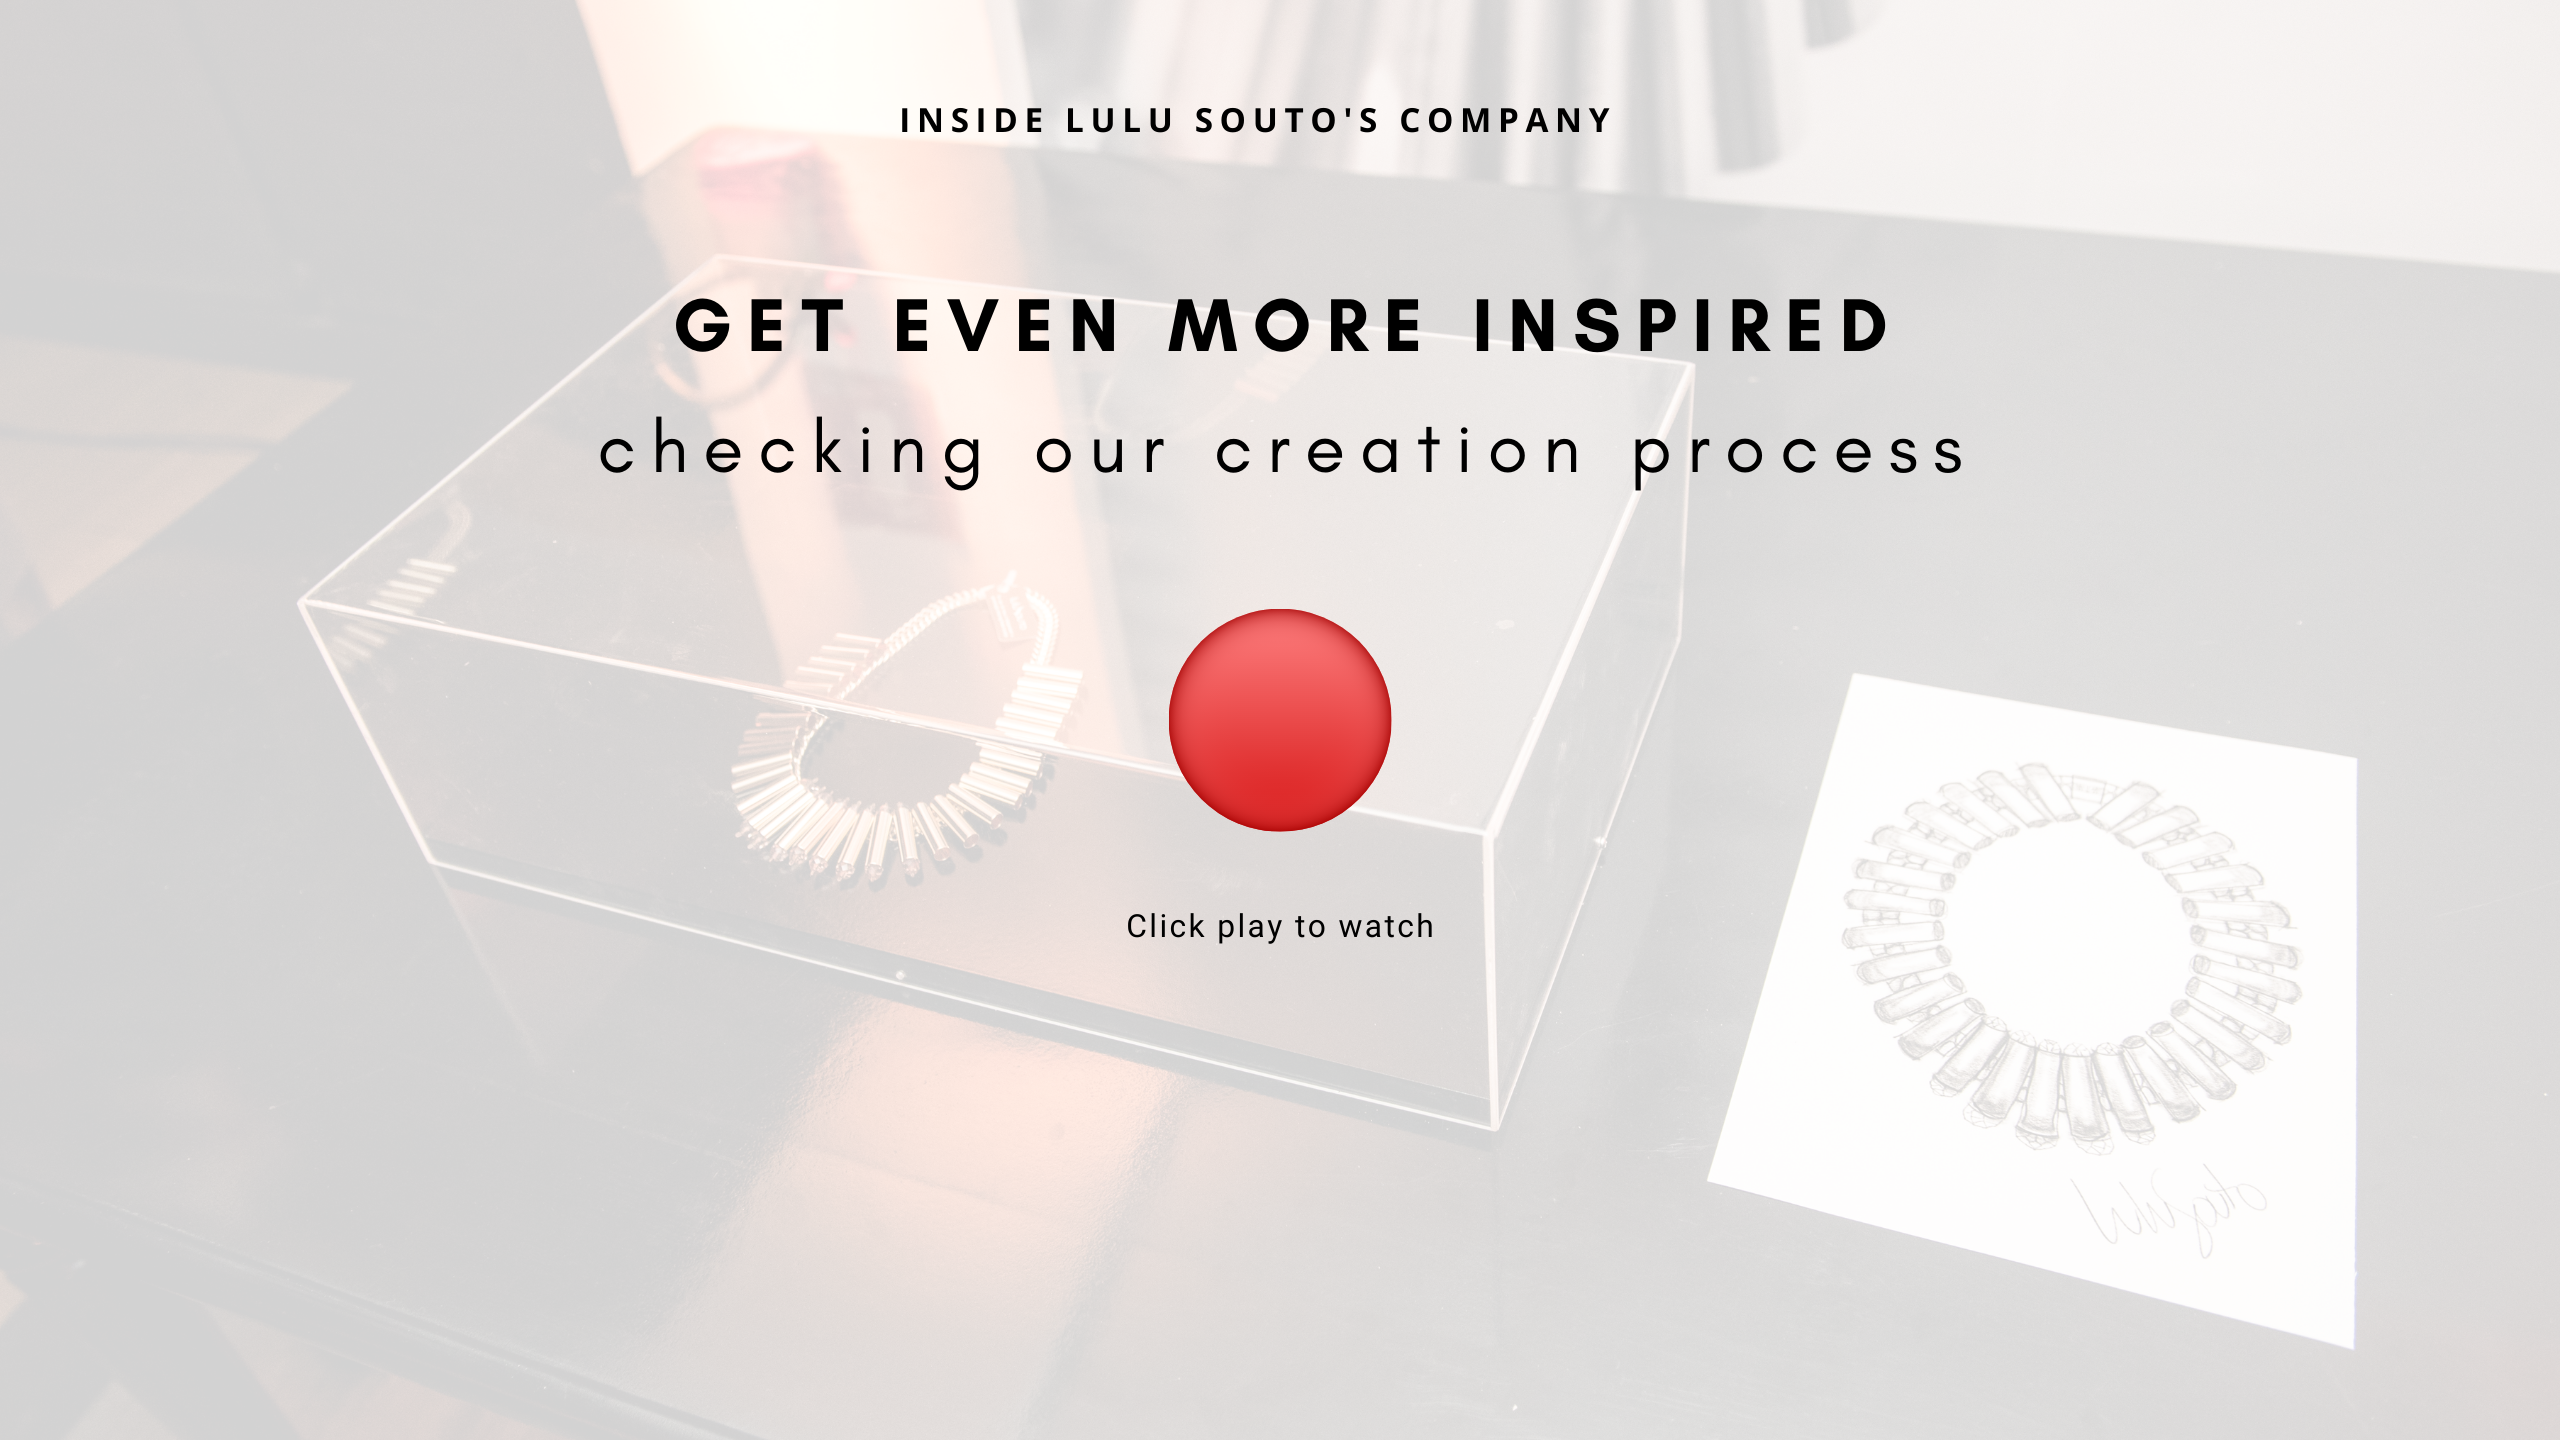 Load video: Watch this inspiring video of the entire jewelry-making process of the Lulu Souto company.